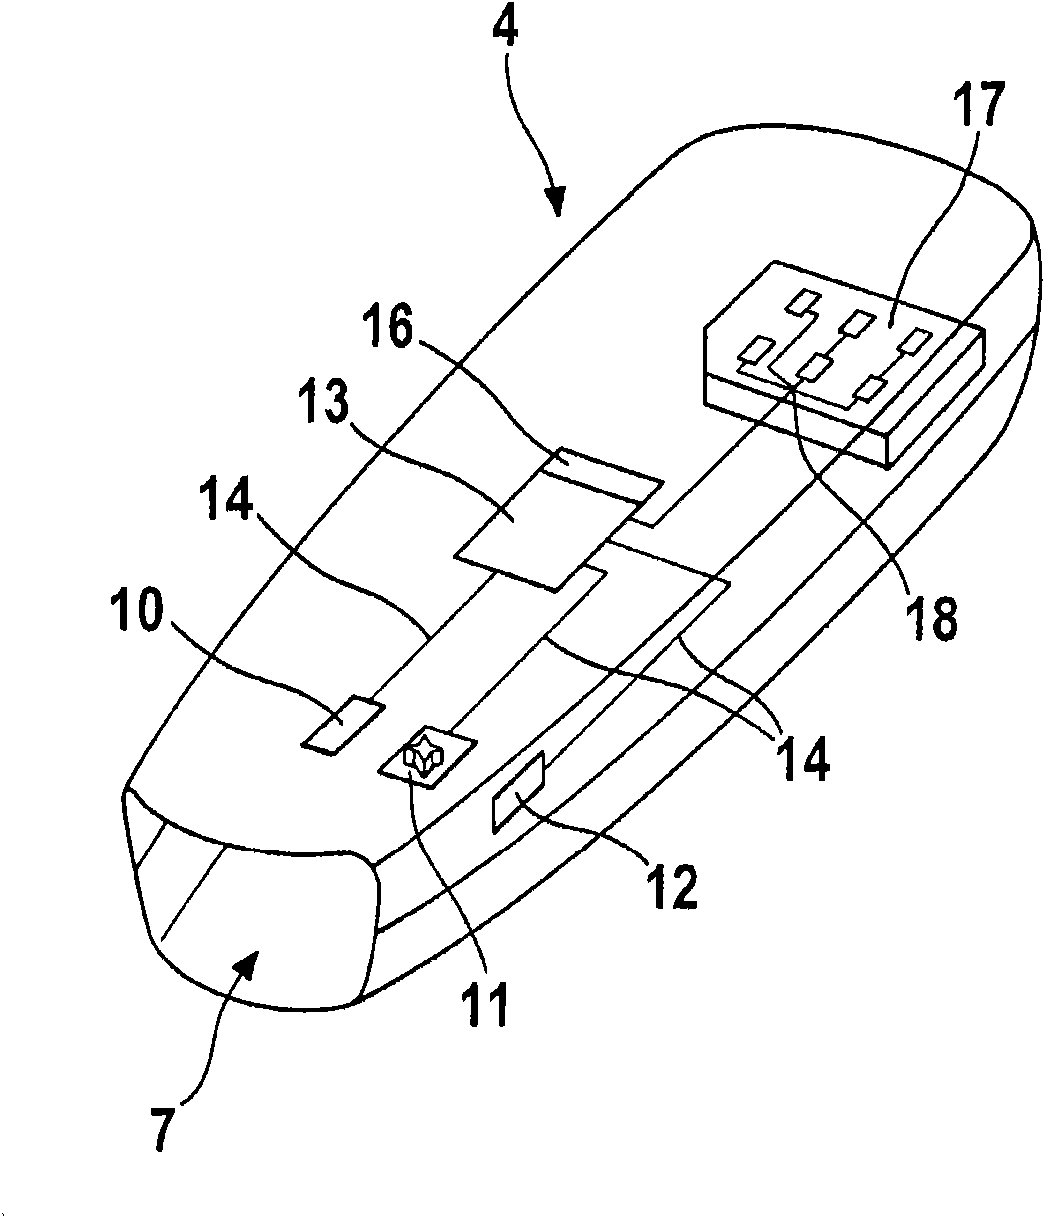 System for measuring an analyte concentration in a bodily fluid sample